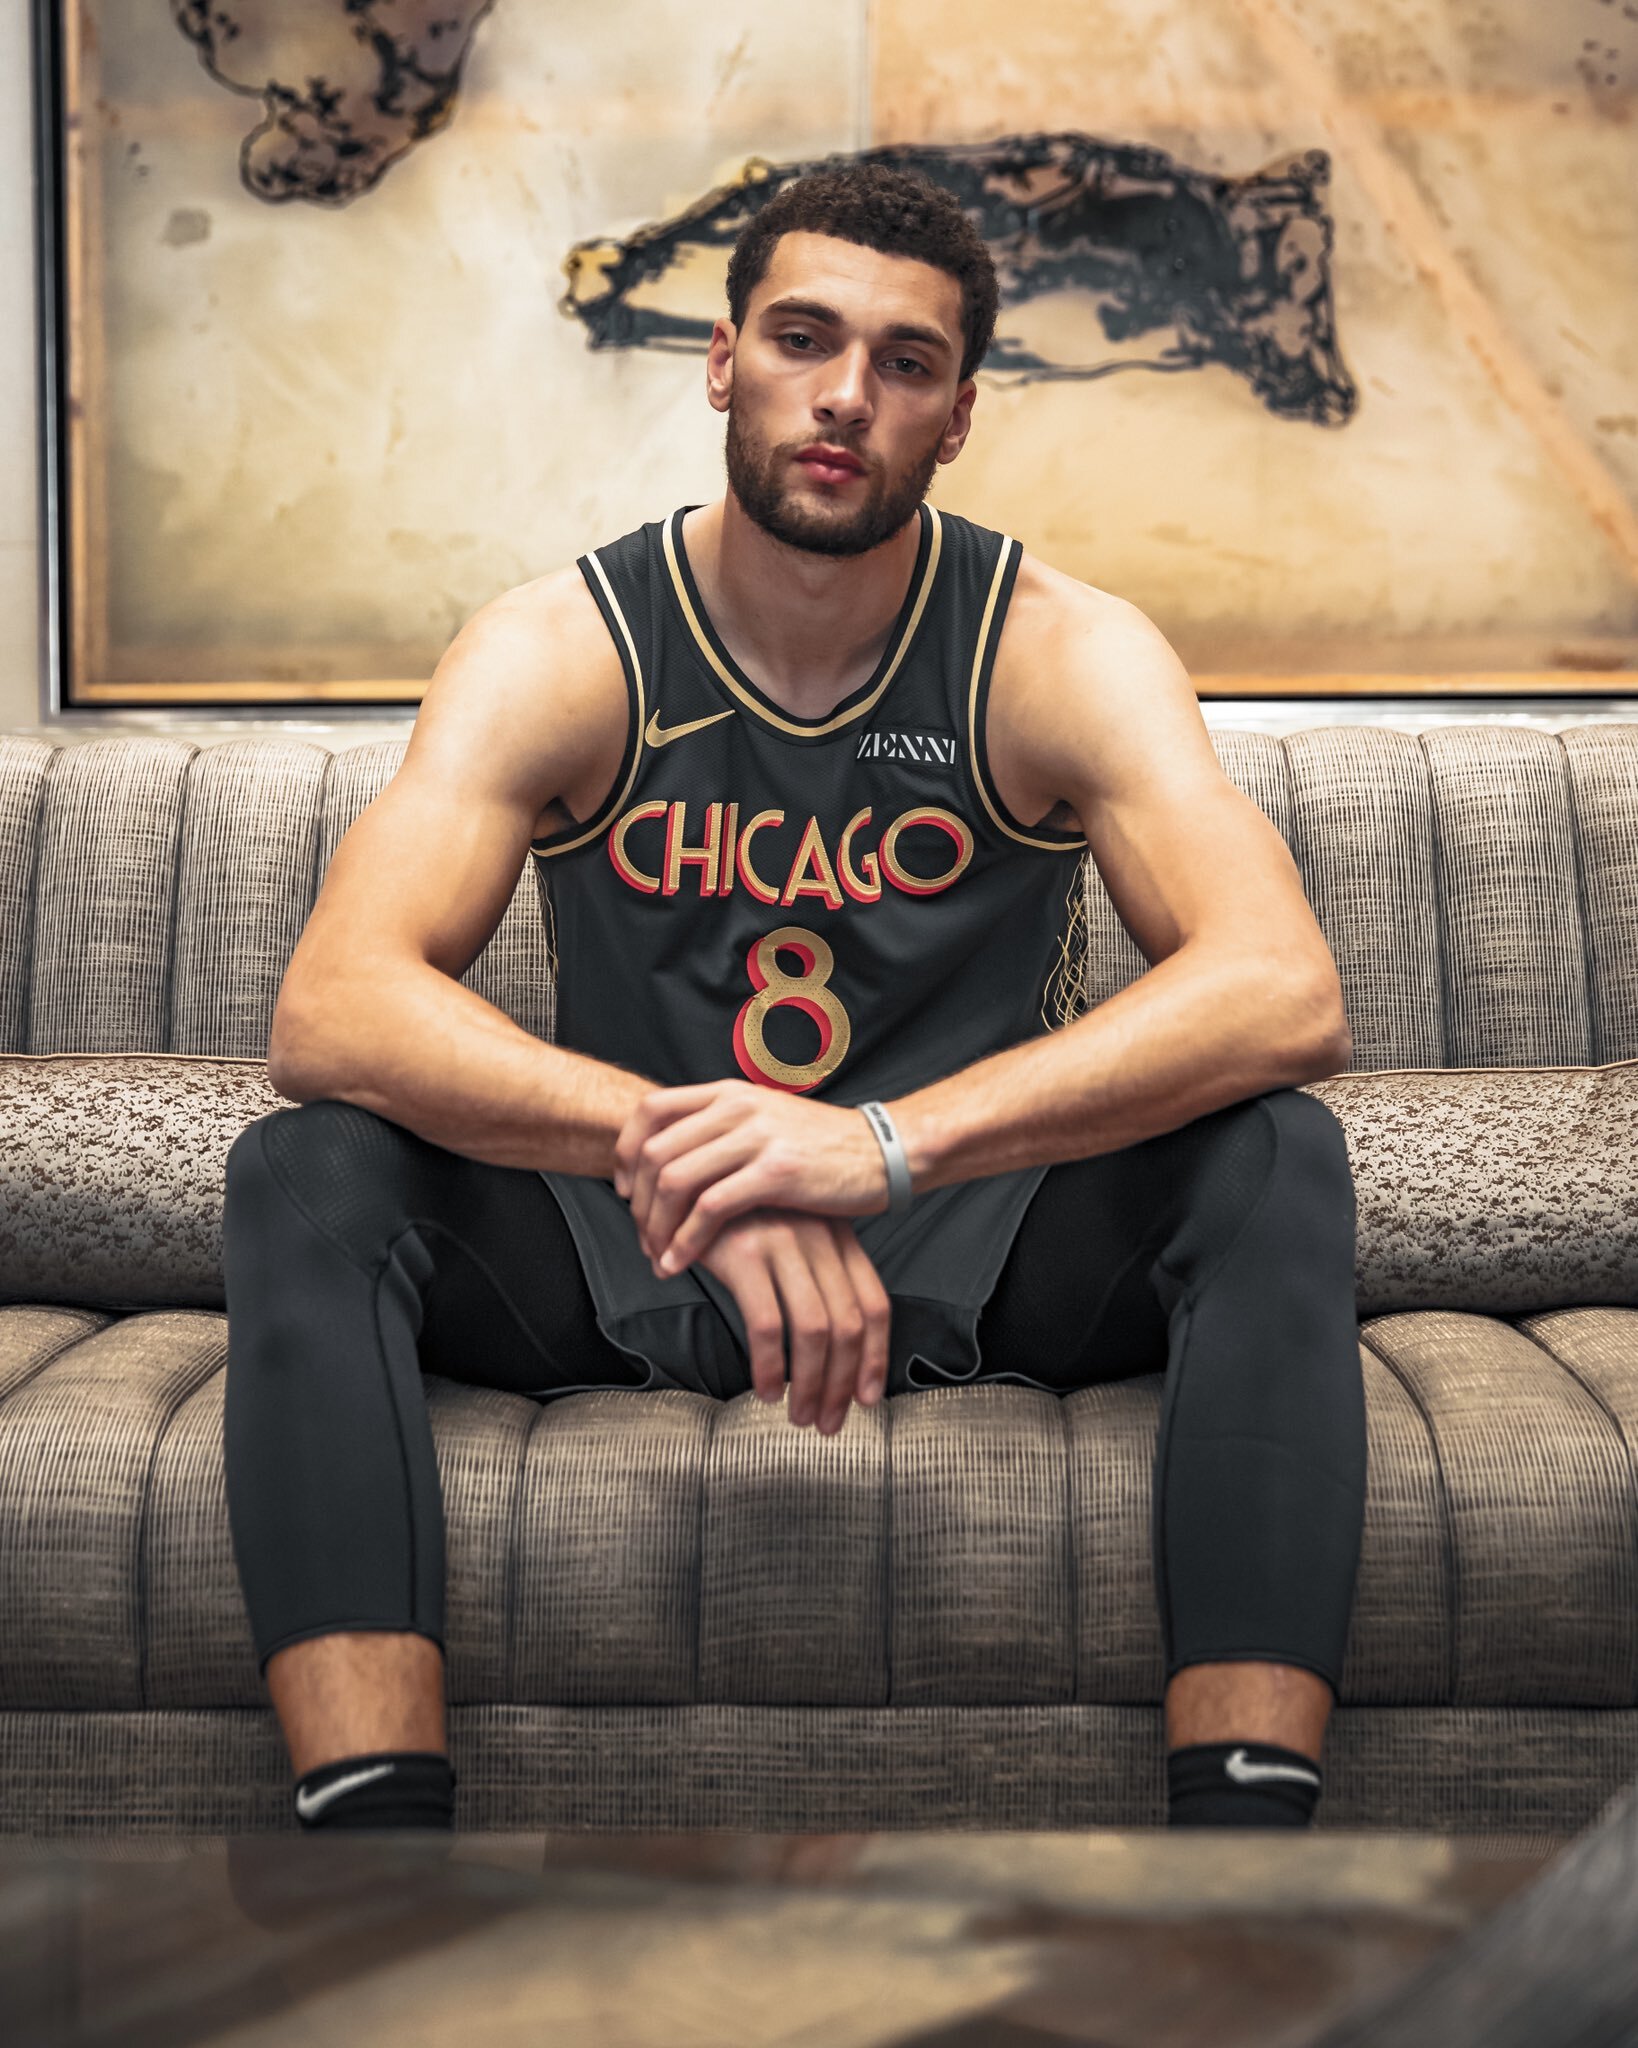 Chicago Bulls' new City Edition jerseys are Art Deco-inspired